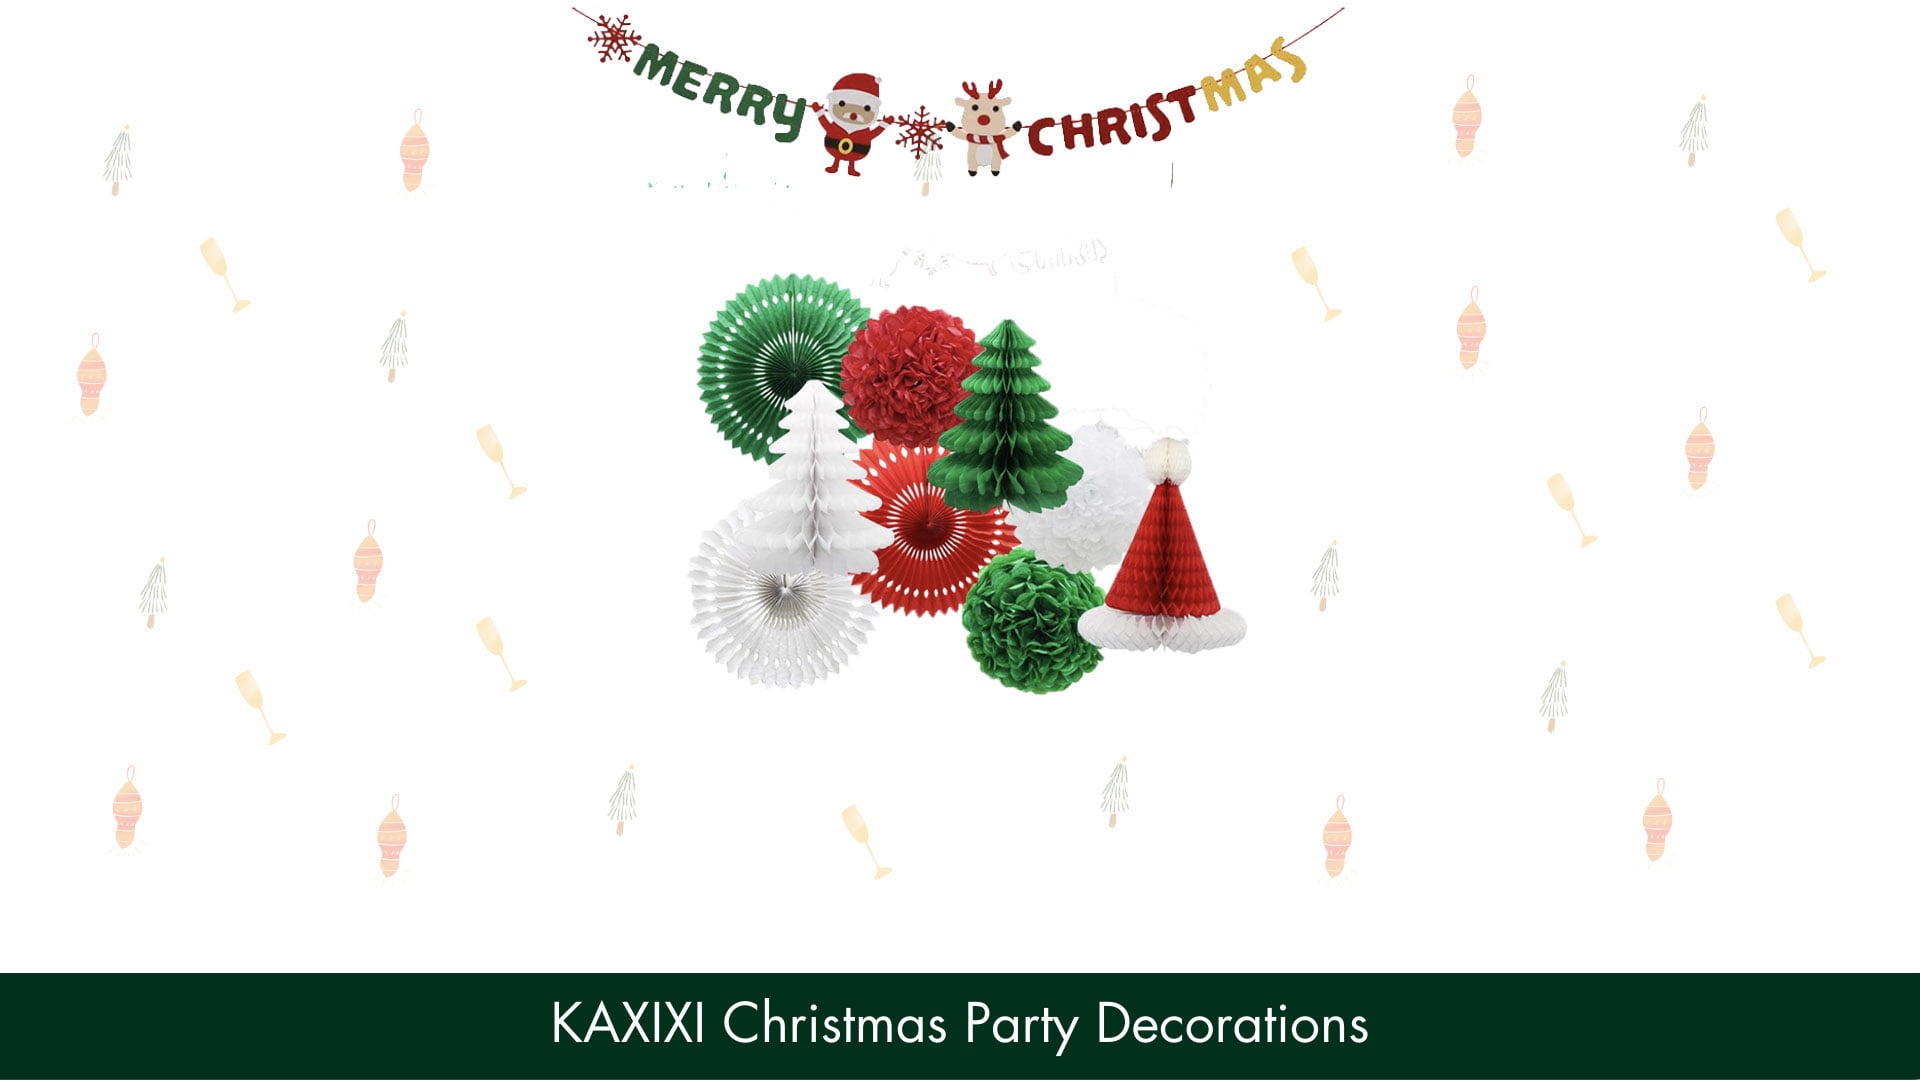 KAXIXI Christmas Party Decorations